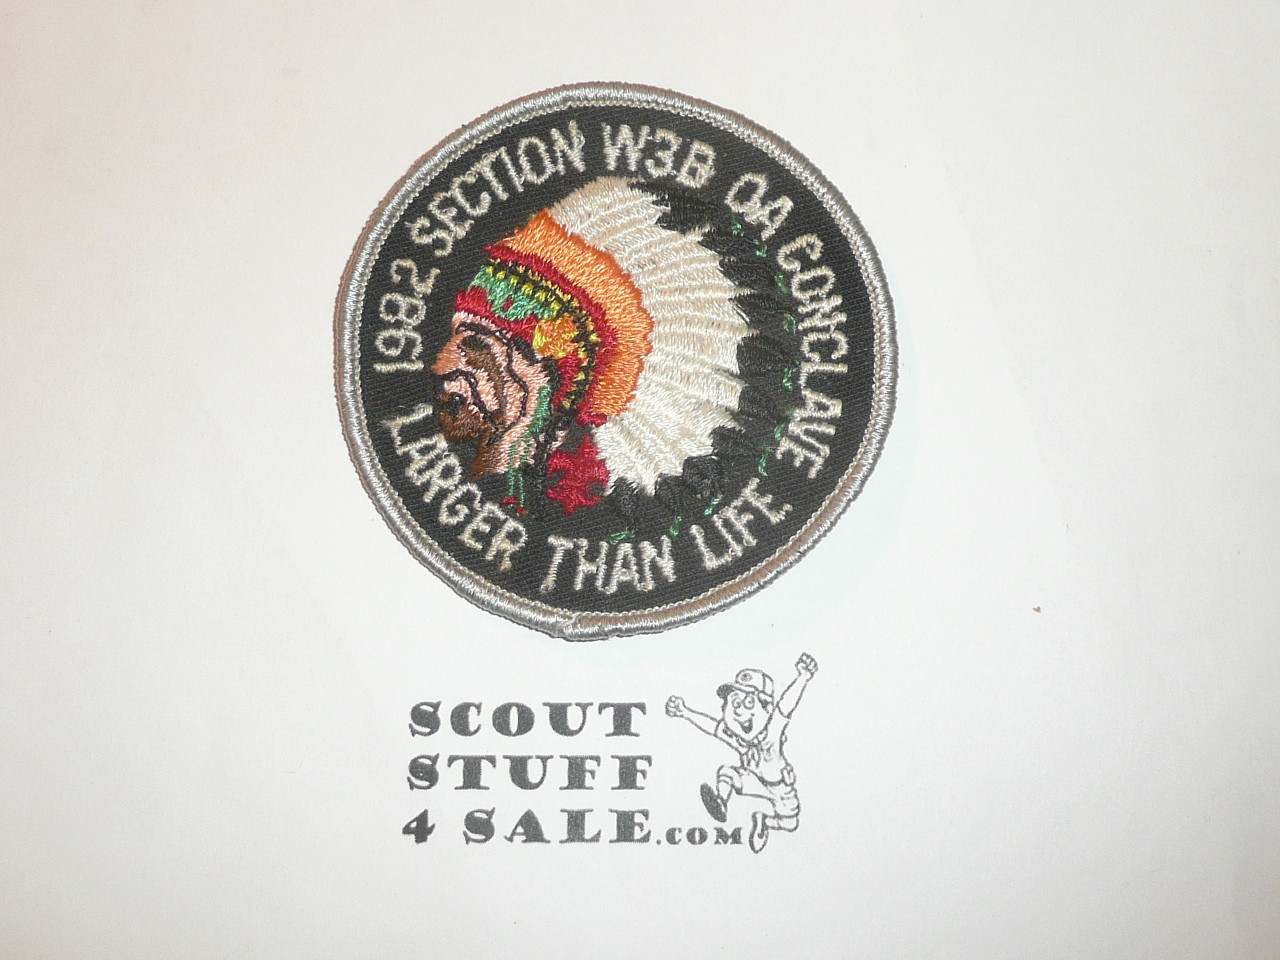 Section W3B 1982 O.A. Conclave Patch - Scout